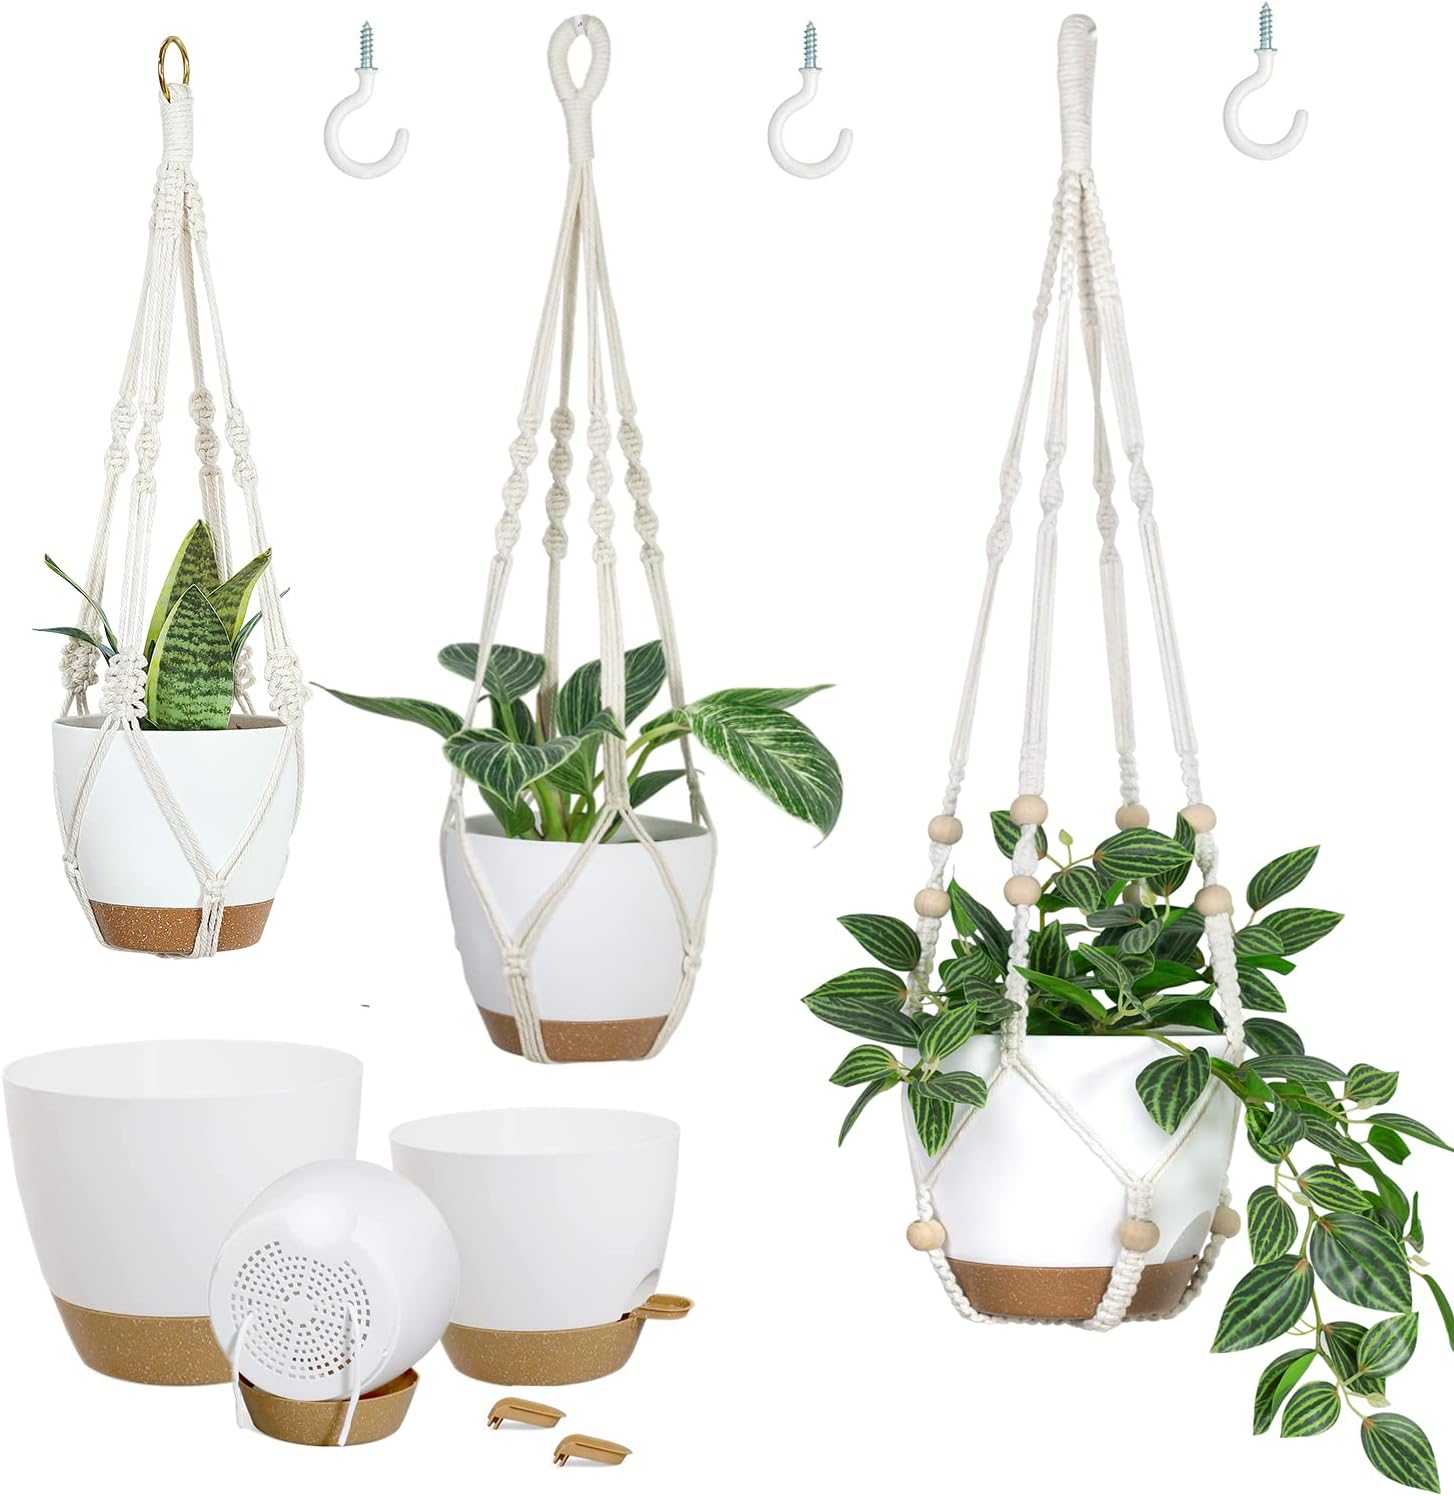 Bouqlife Hanging Planters with Macrame Plant Hangers